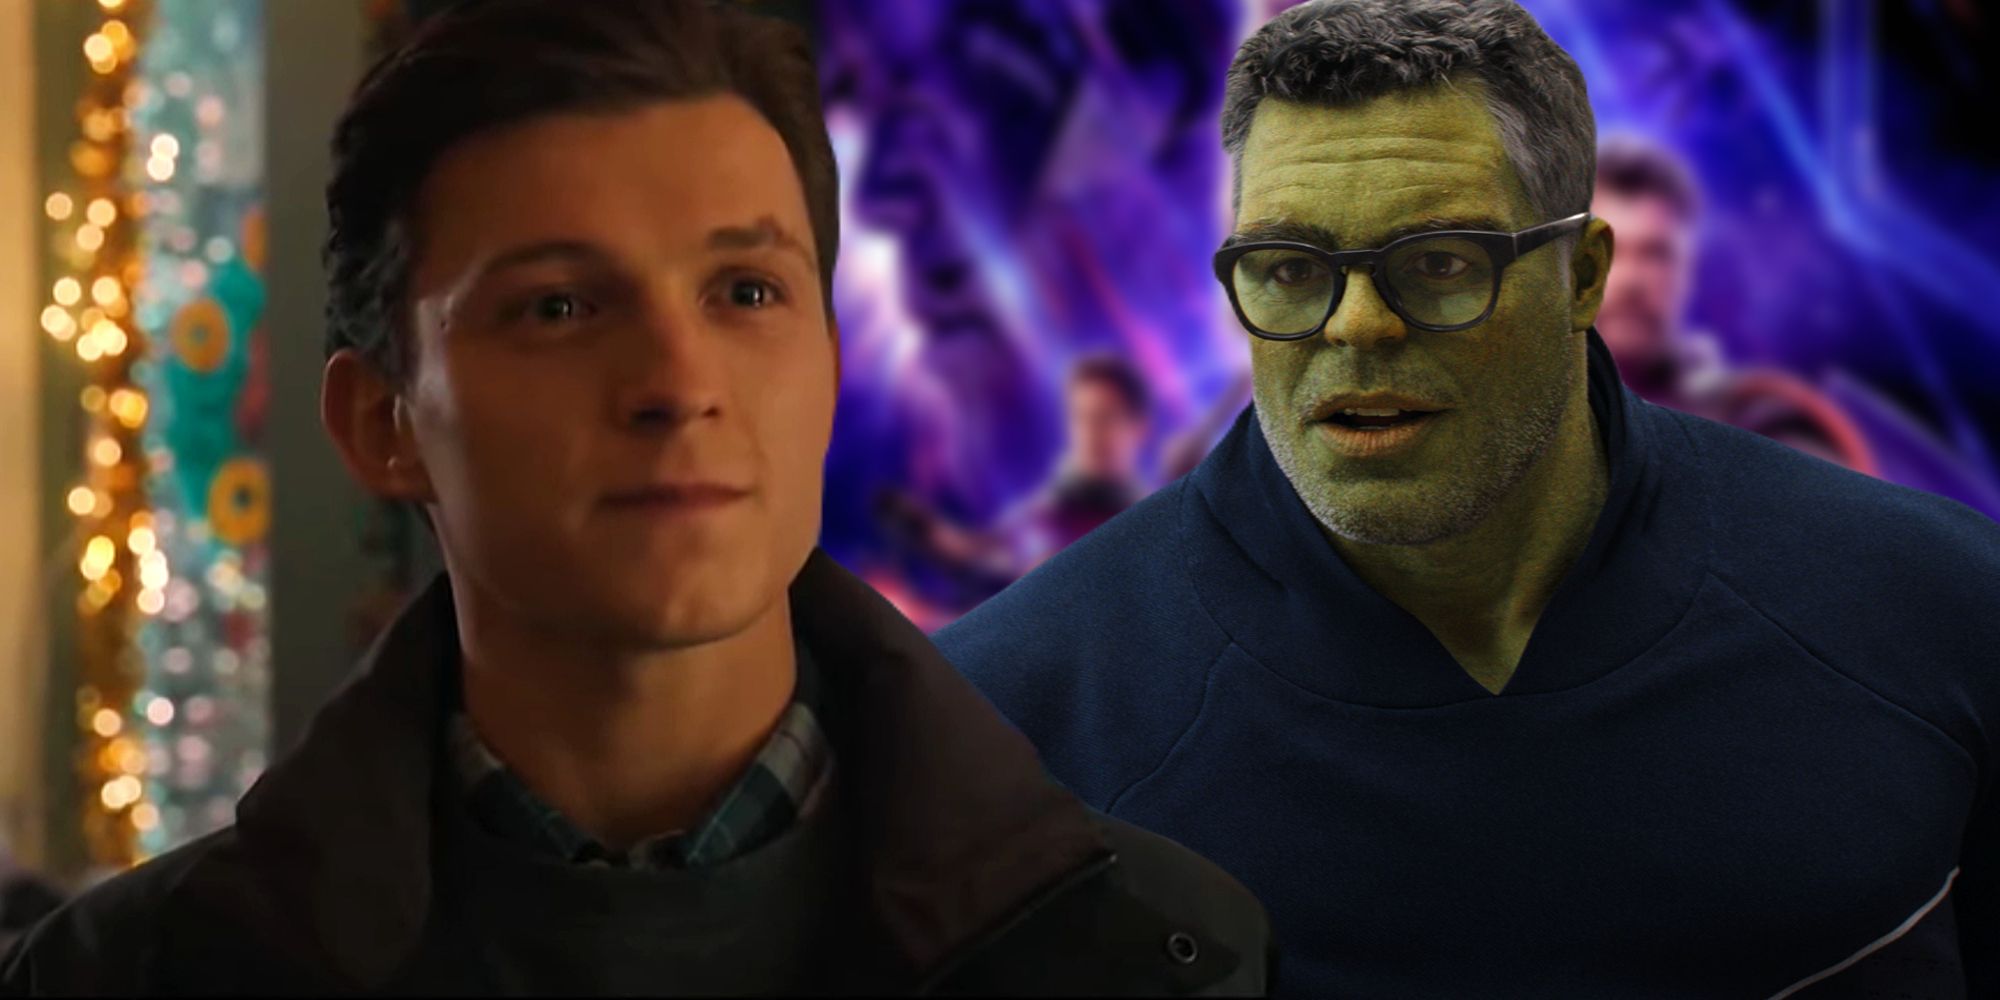 Peter Parker smiling sadly at the end of Spider-Man: No Way Home next to Smart Hulk above a blurred poster of Avengers: Endgame